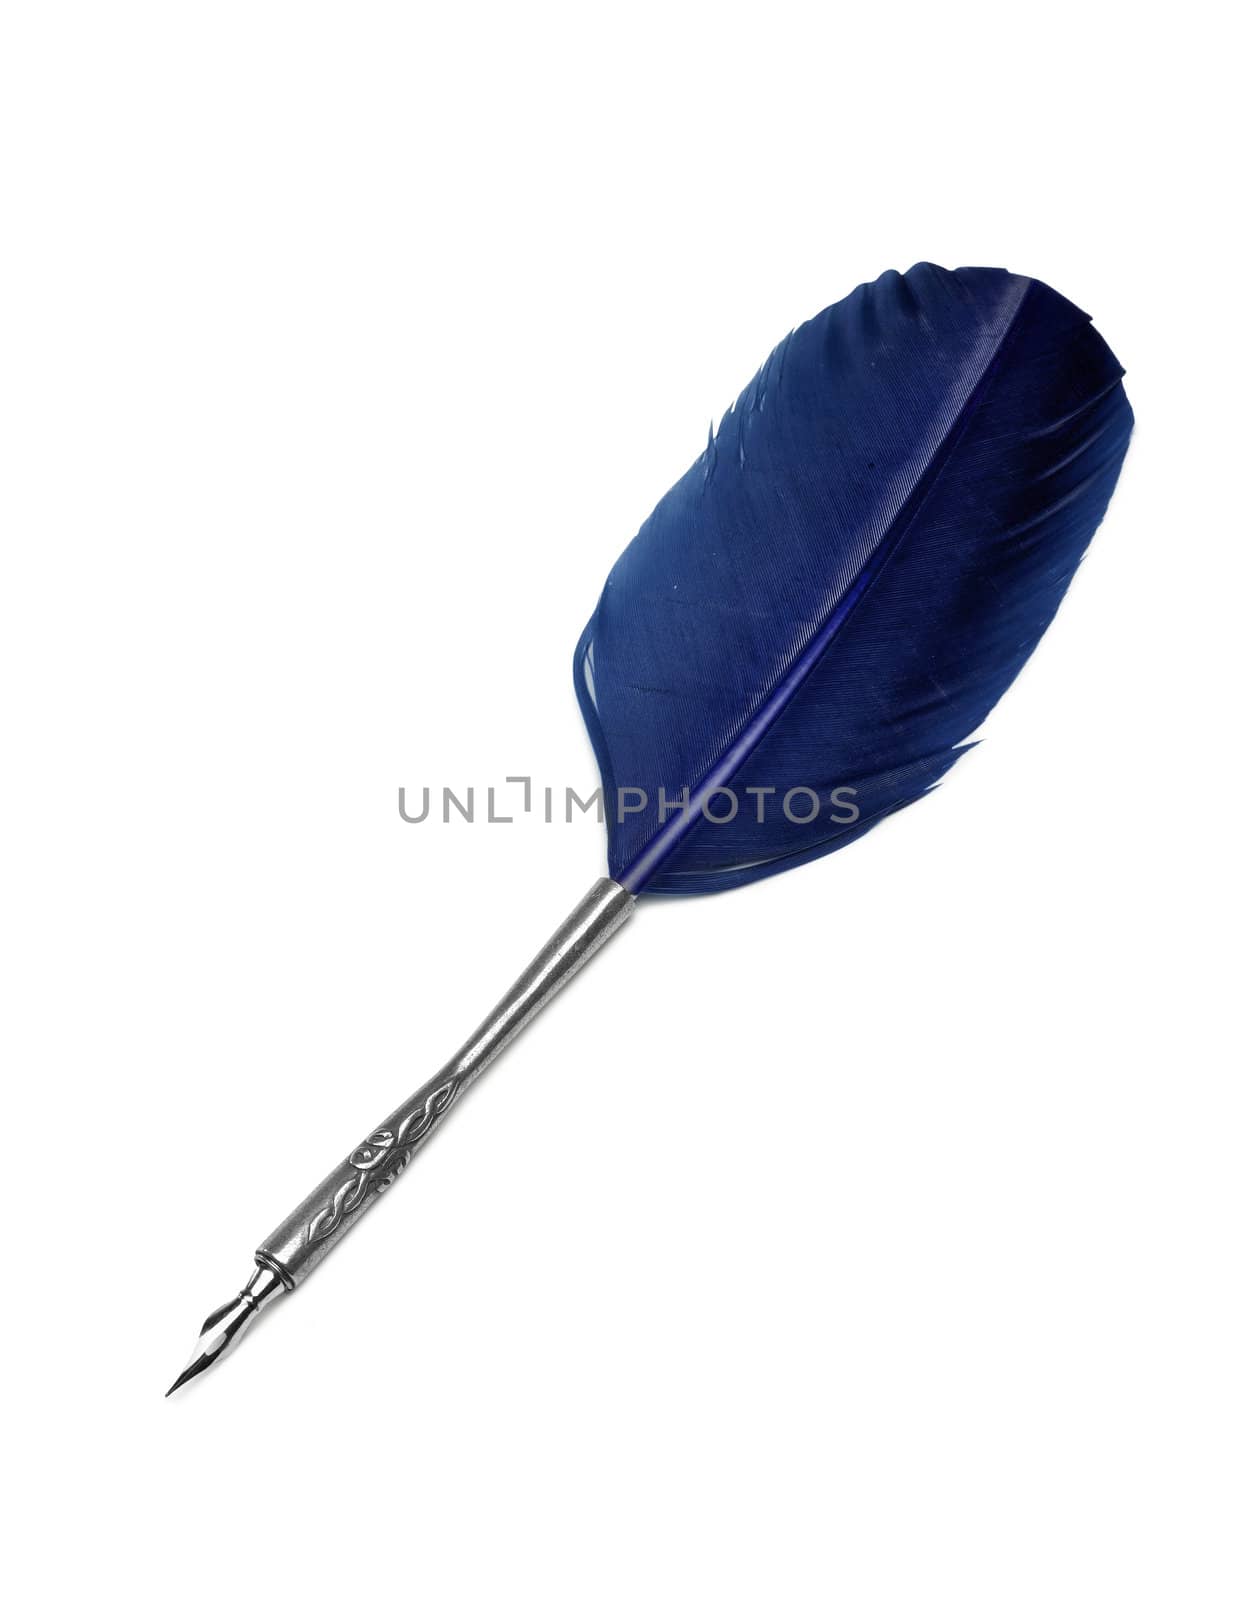 Ink feather tool by pbombaert